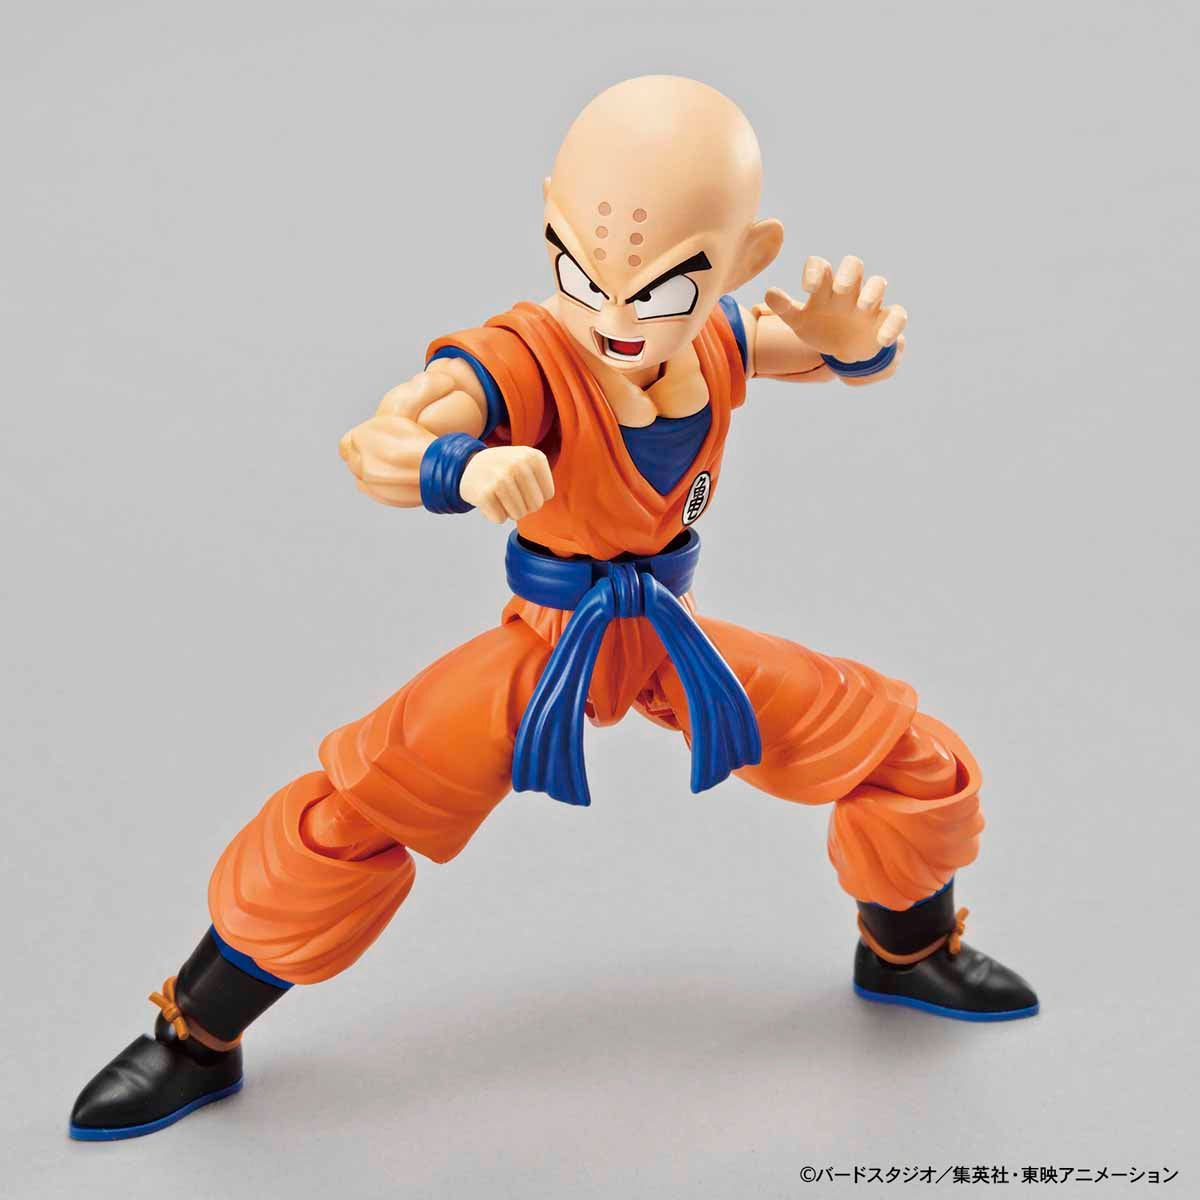 Dragon Ball - Krillin - Figure-rise Standard Model Kit (Bandai), Includes Special Effect Parts for Solar Flare and Destructo Disc, 3 Facial Expression Options, 6 Unique Forehead Patterns, Sold by Nippon Figures